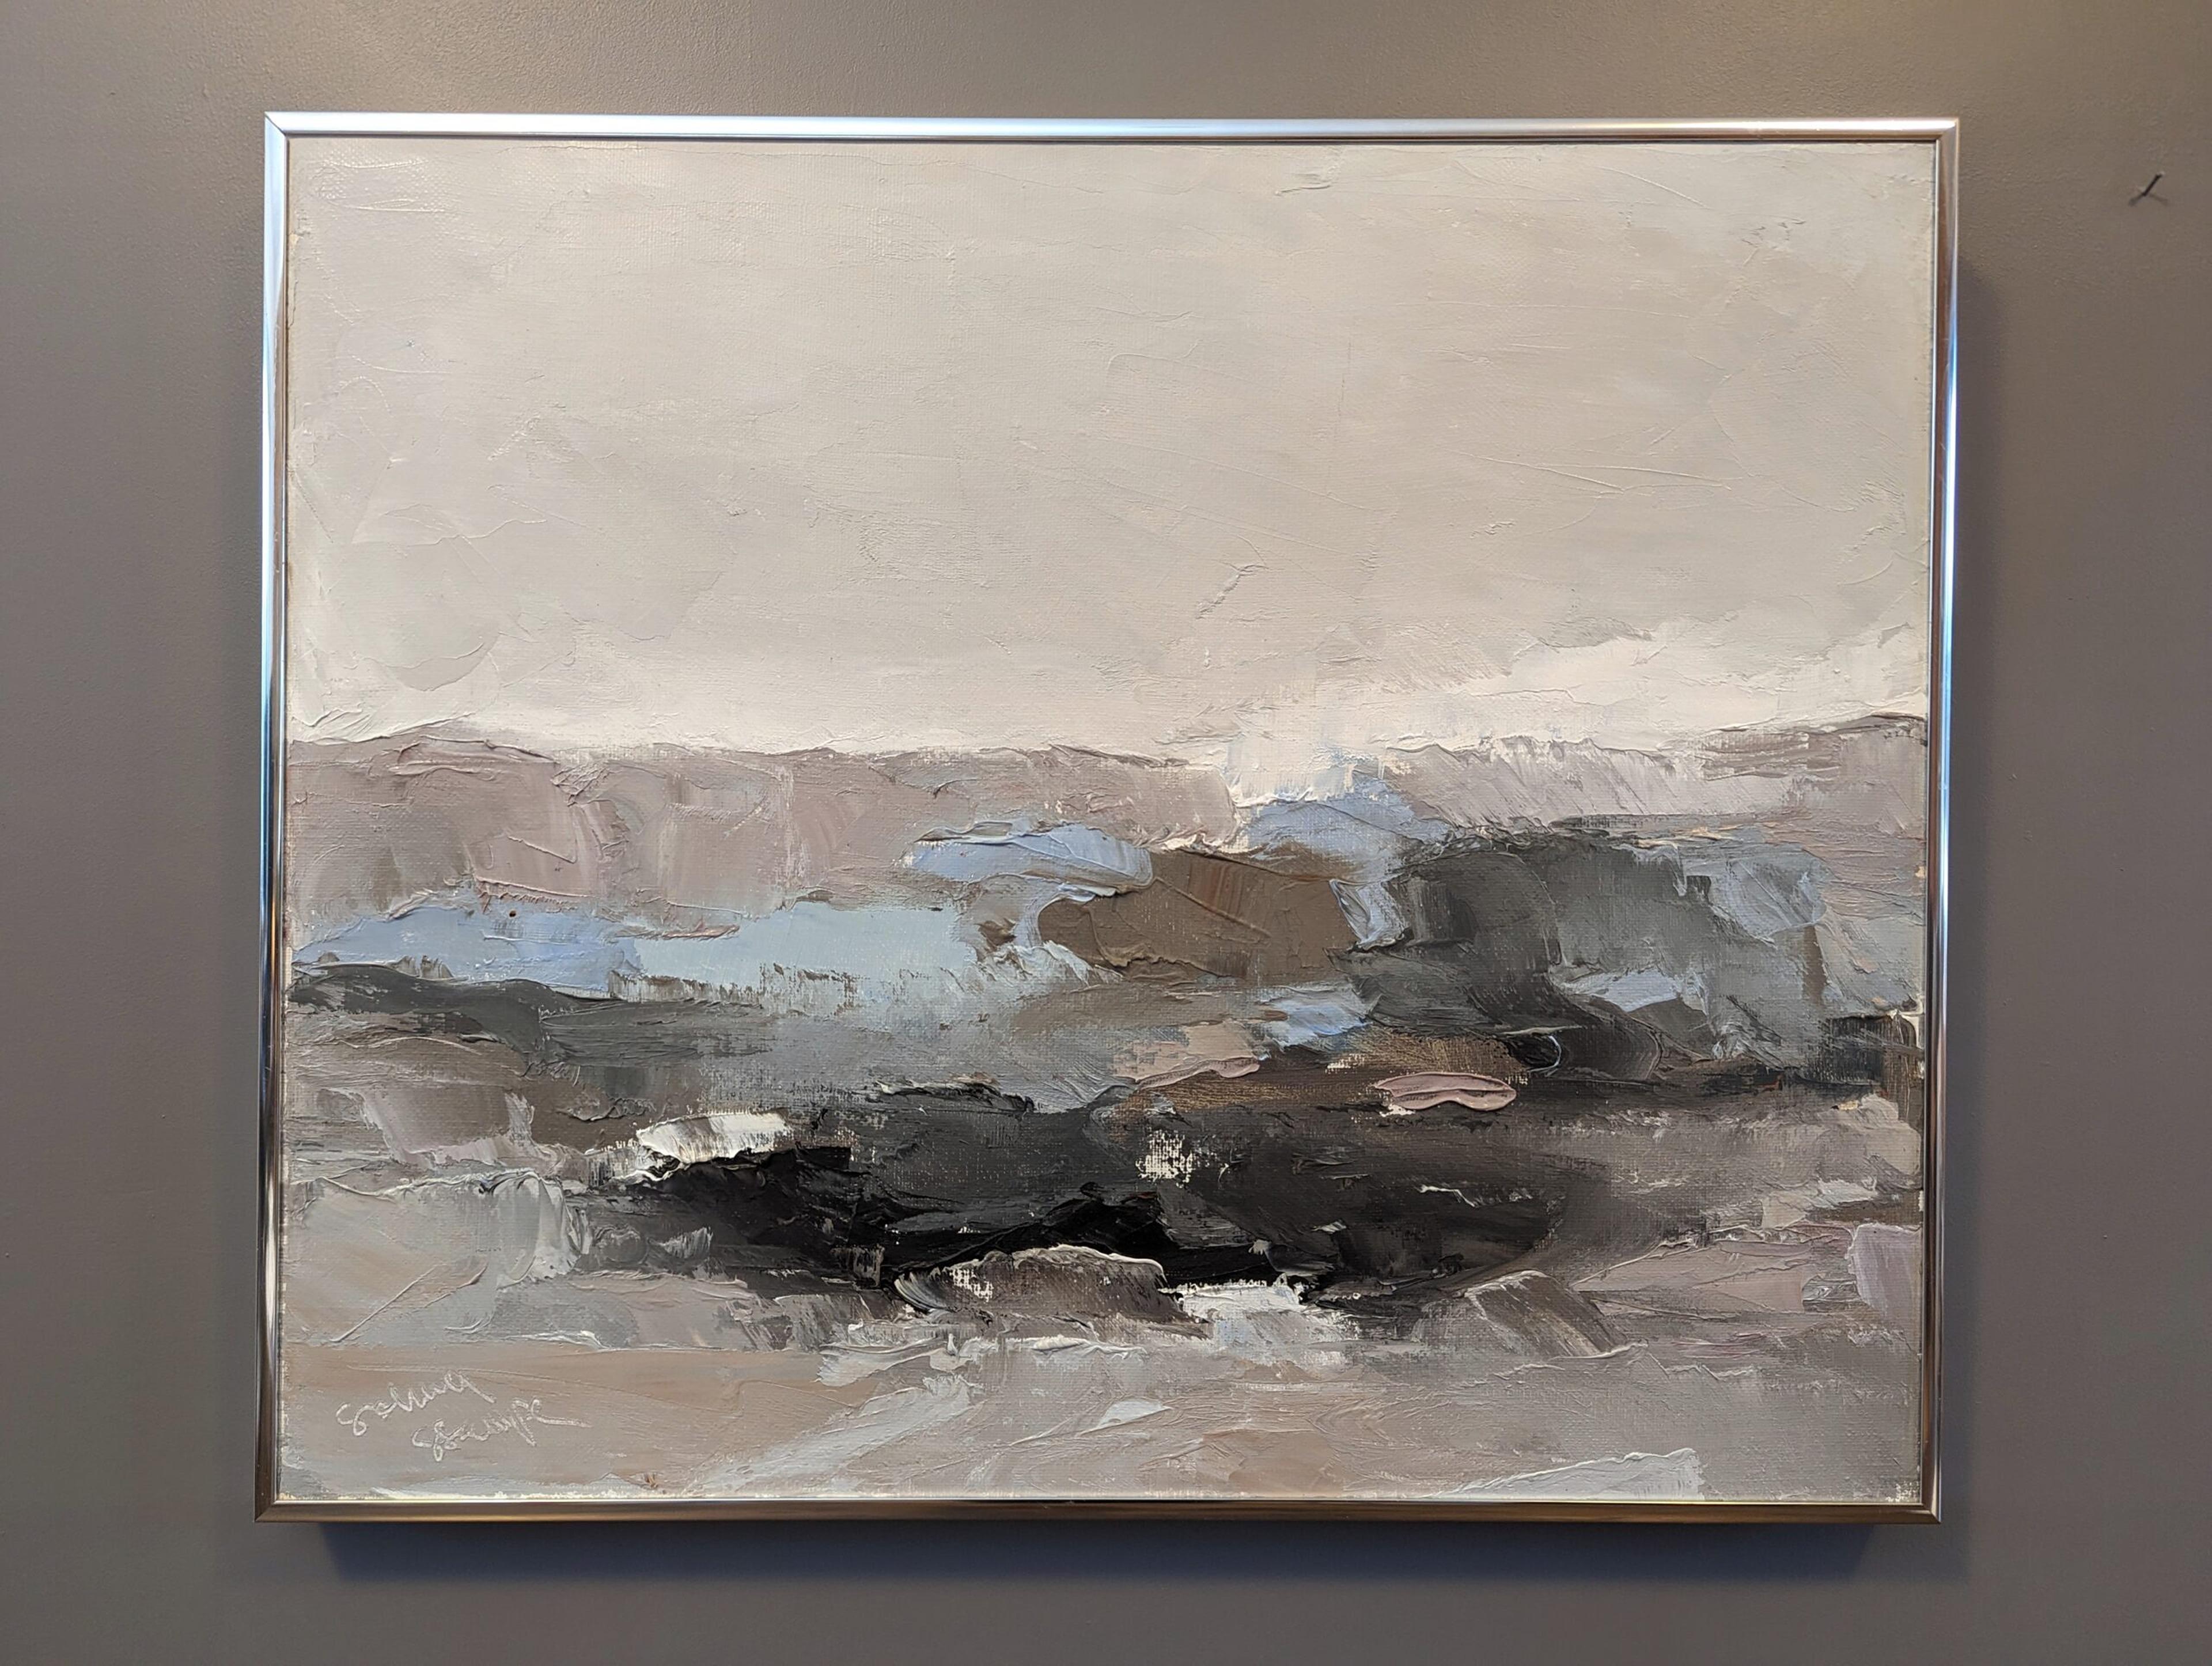 EPHEMERAL SHORES
Size: 49.5 x 59 cm (including frame)
Oil on Canvas

An atmospheric mid-century composition of a coastal scape enveloped in sea fog, painted in oil onto canvas.

Abstract in nature, the artist masterfully uses a reduced colour